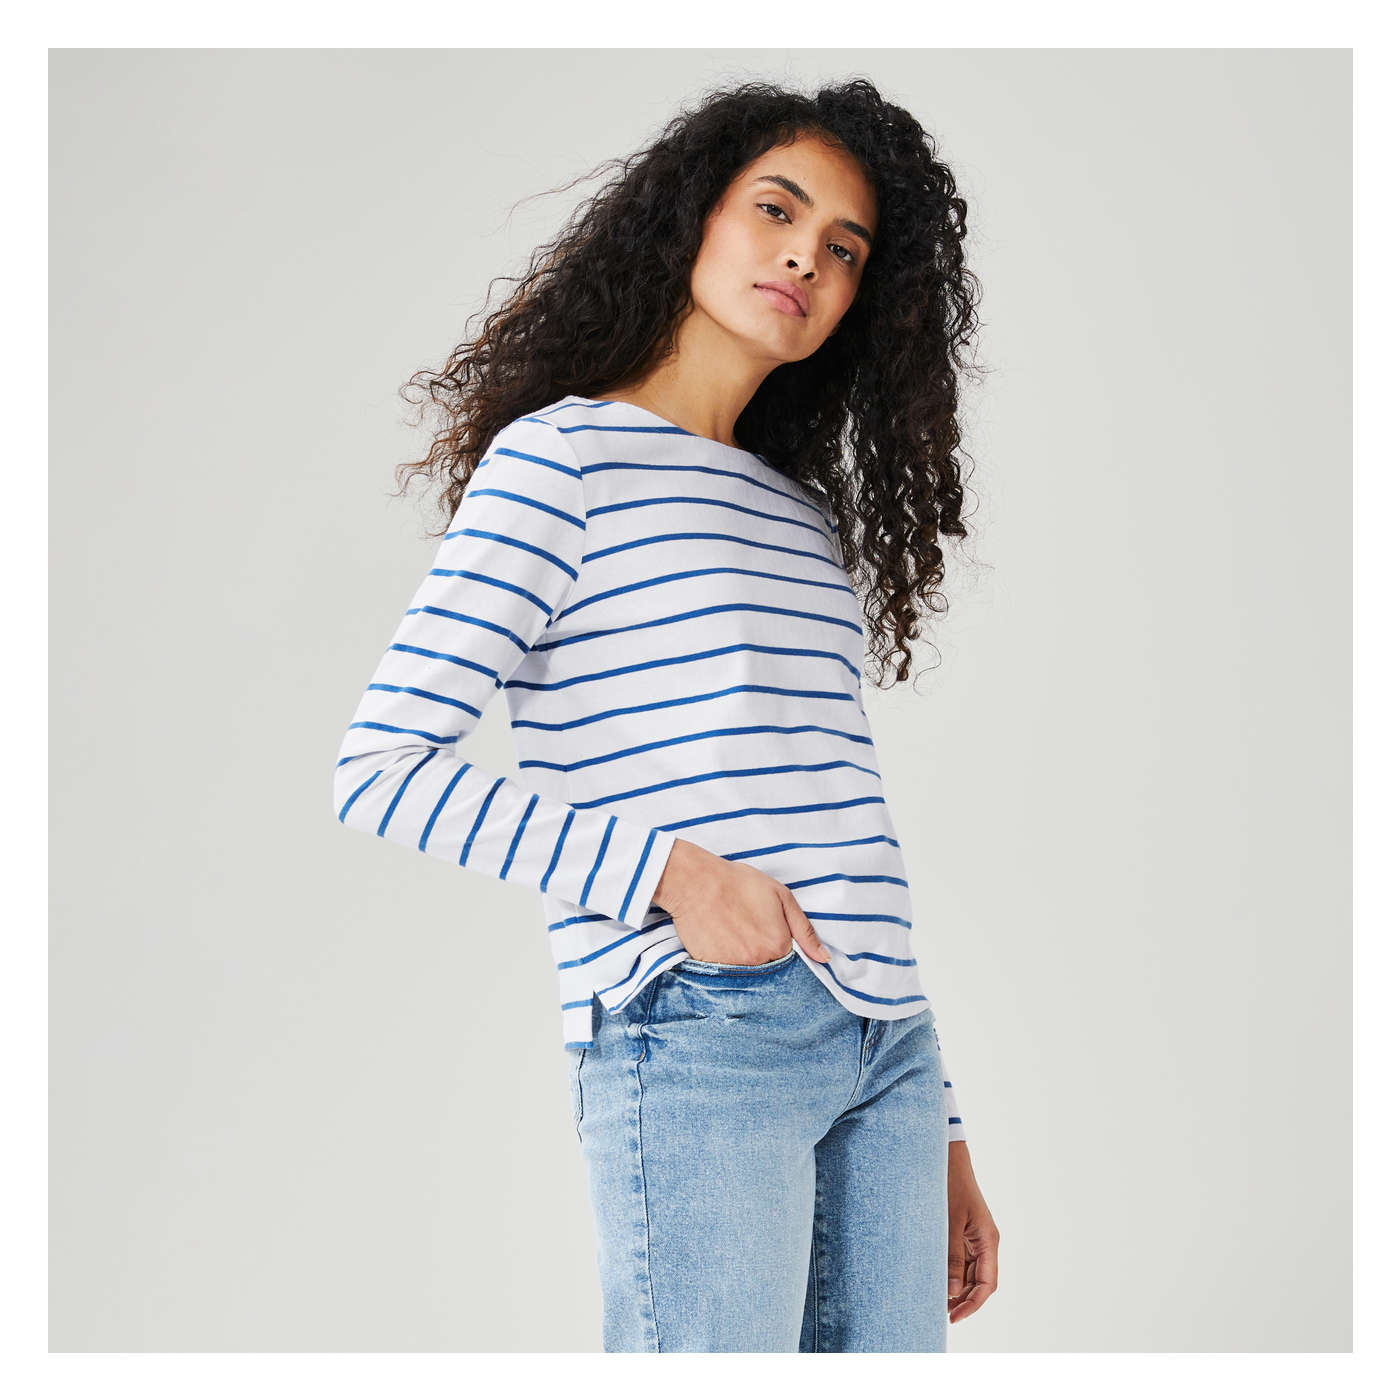 Essential Striped Top in White from Joe Fresh